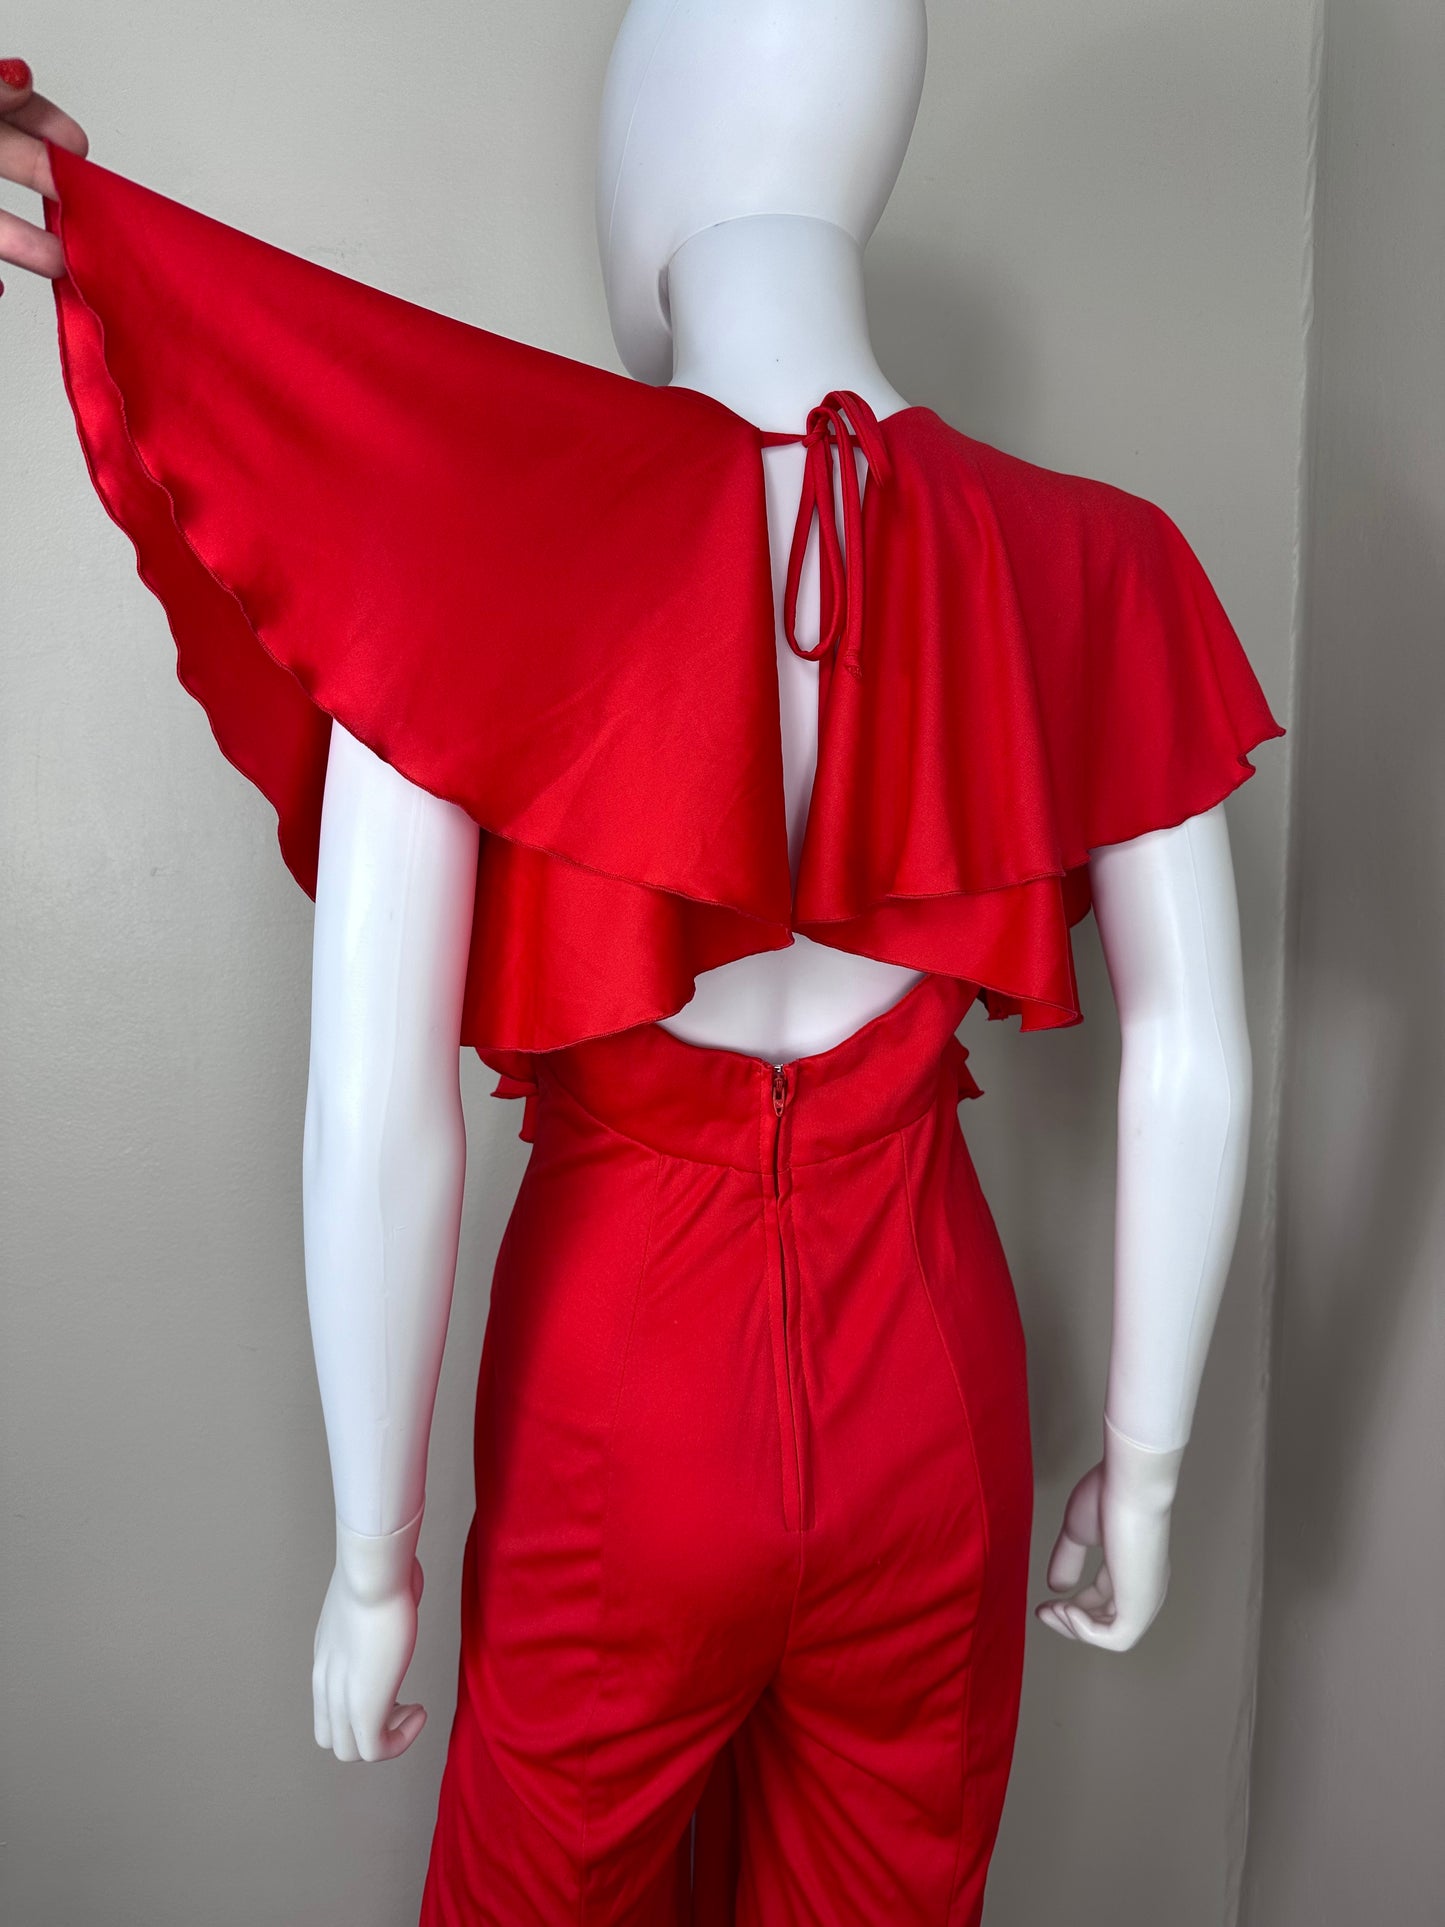 1970s Red Bellbottom Jumpsuit with Ruffles, Jack Hartley Size Small-Medium